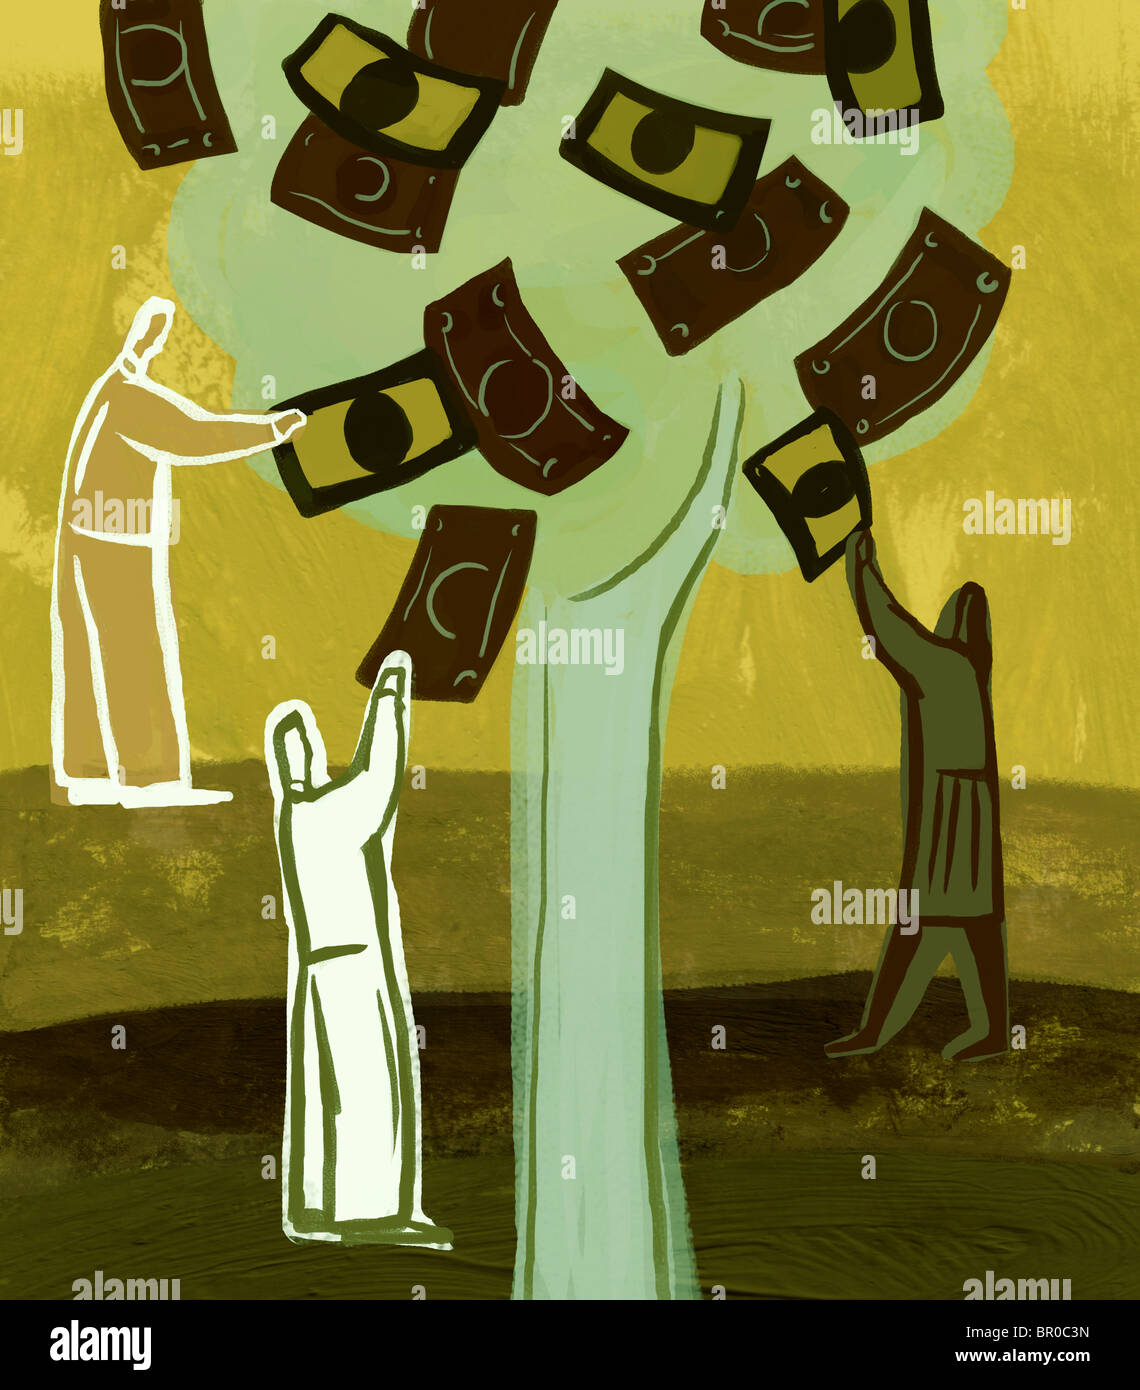 An illustration of people picking money from a tree Stock Photo